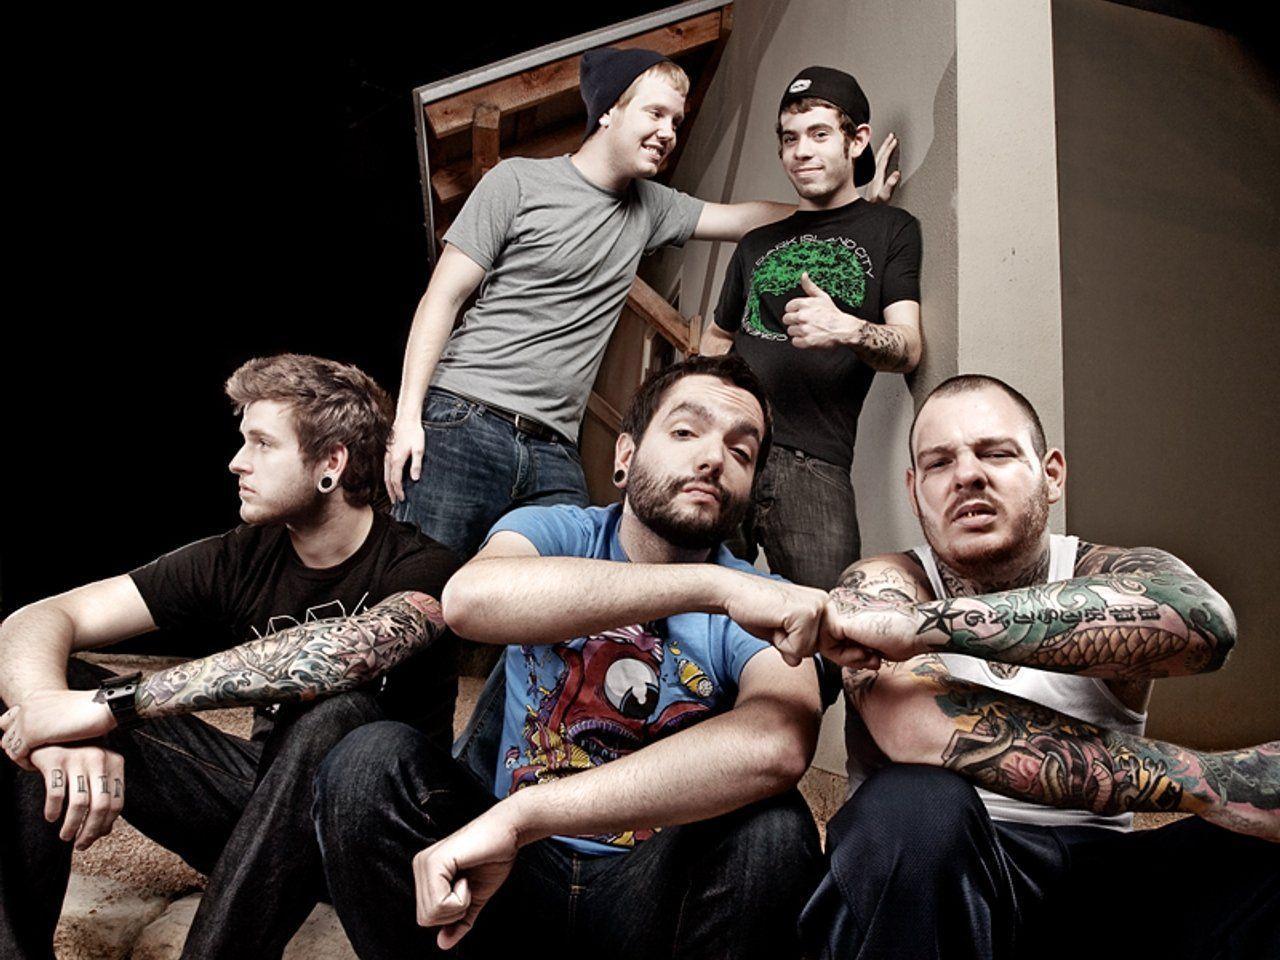 Wallpaper For > A Day To Remember Live Wallpaper